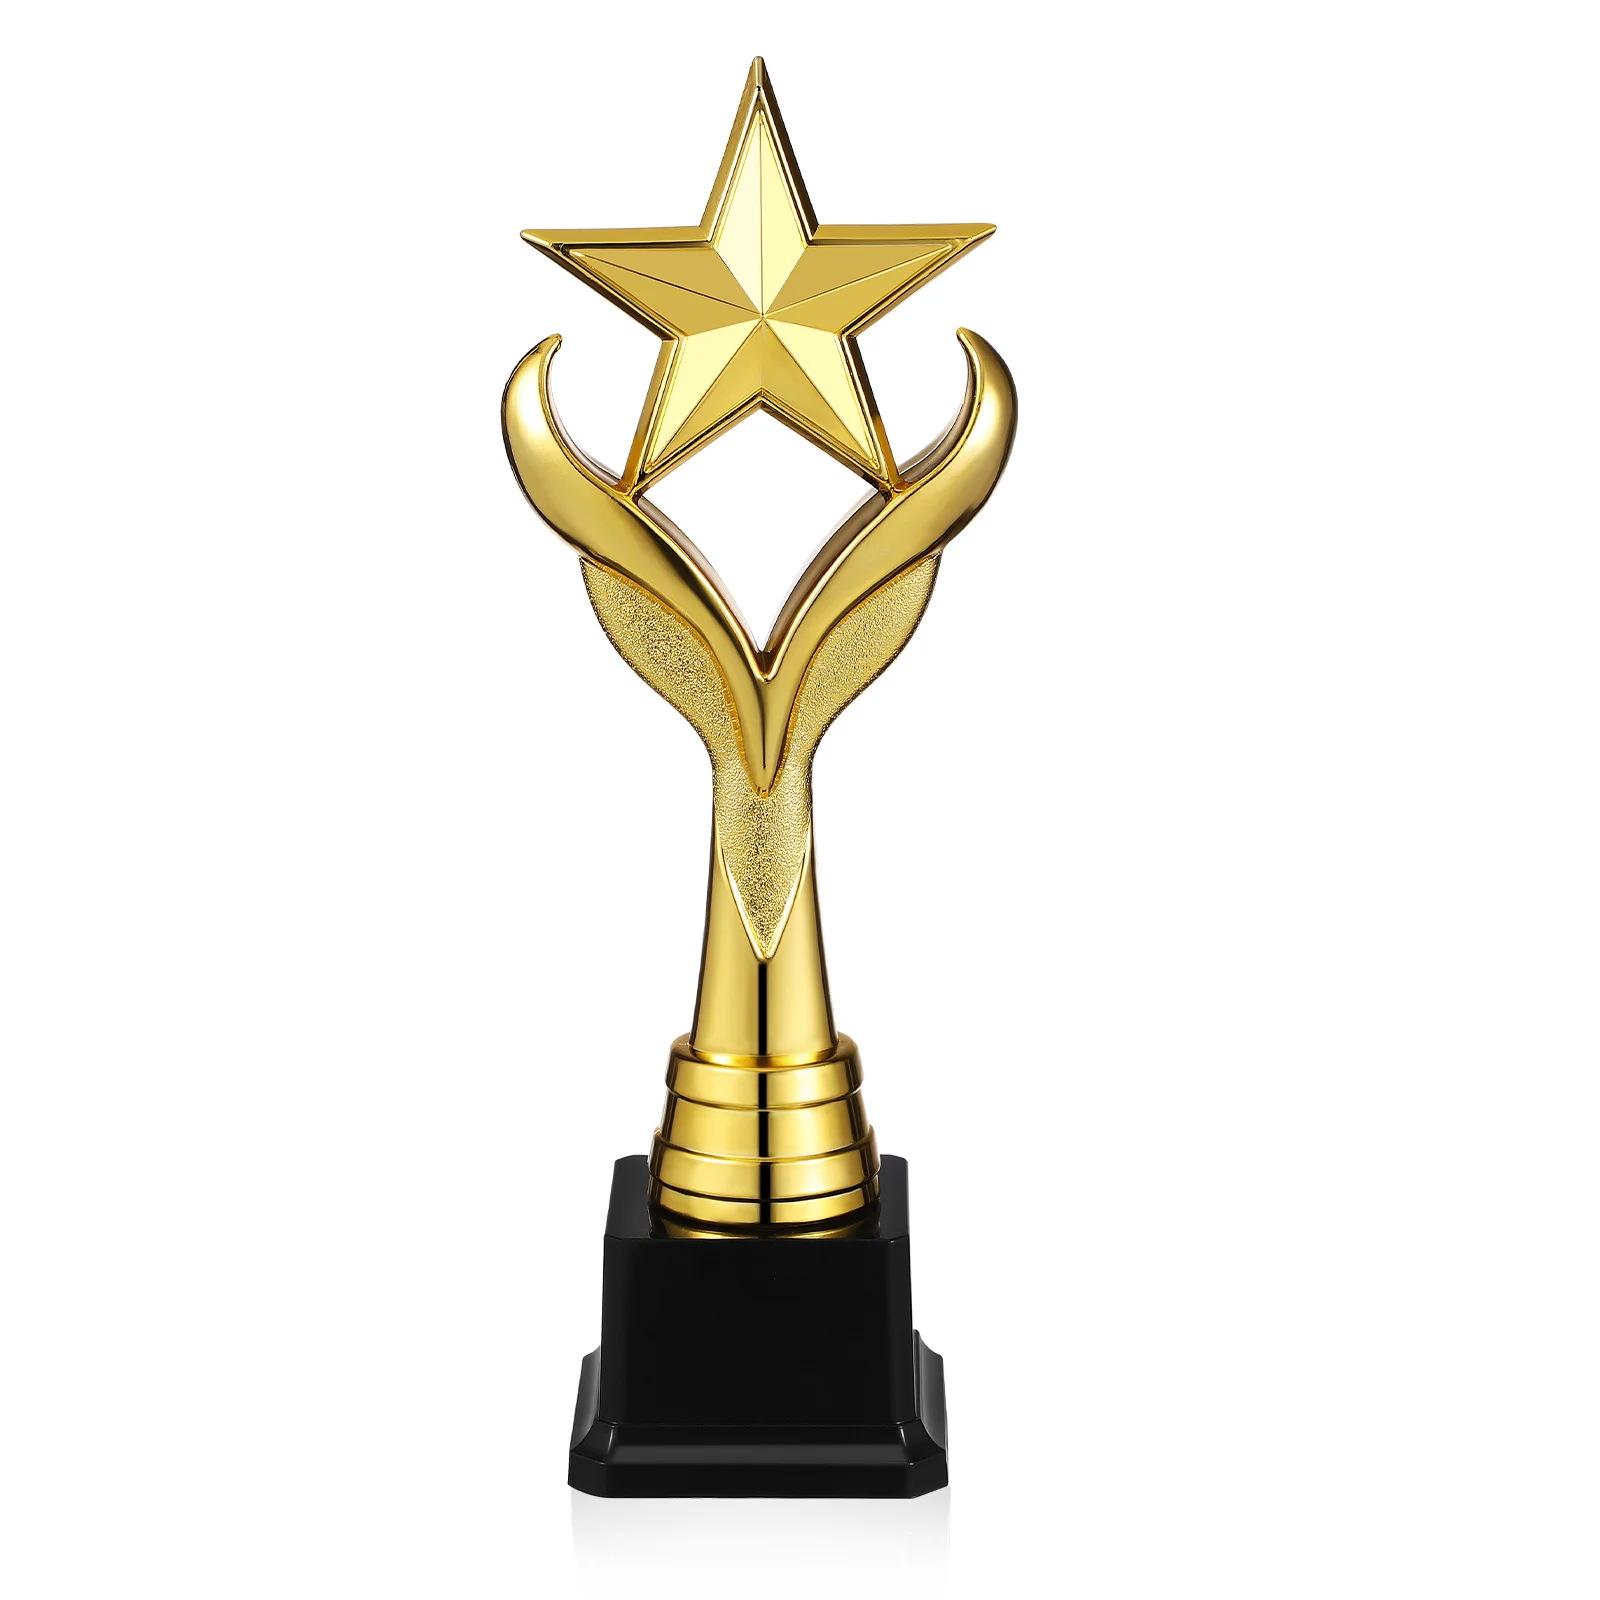 Models Creative Trophy Winner Cup Shaped Decor Holiday Items Award Competition for Sports Child